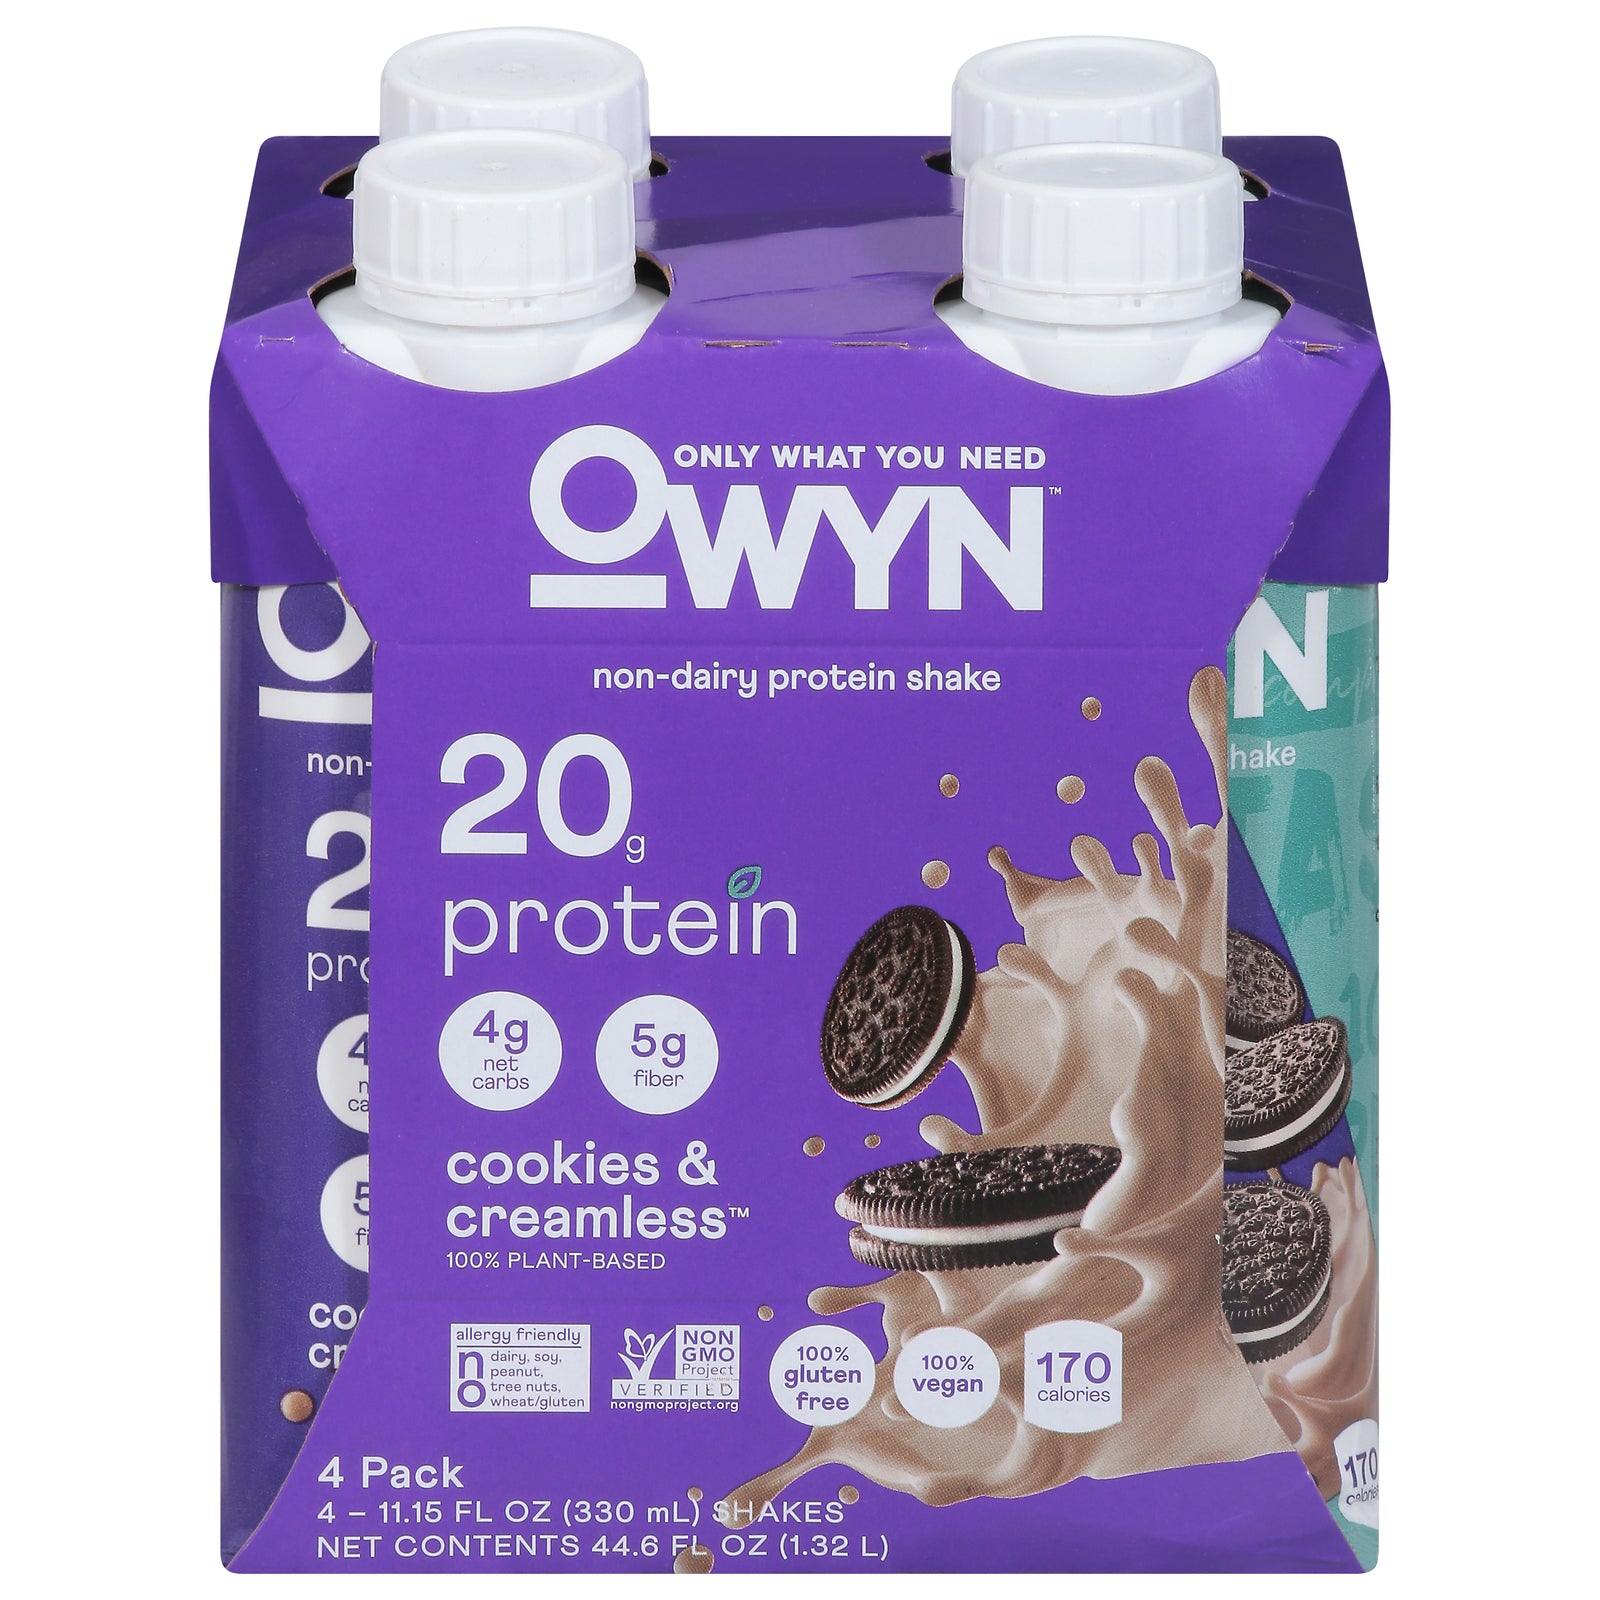 Only What You Need - Plnt Bsd Cky Cream Protein Shk - Case of 3-4/11.14Z